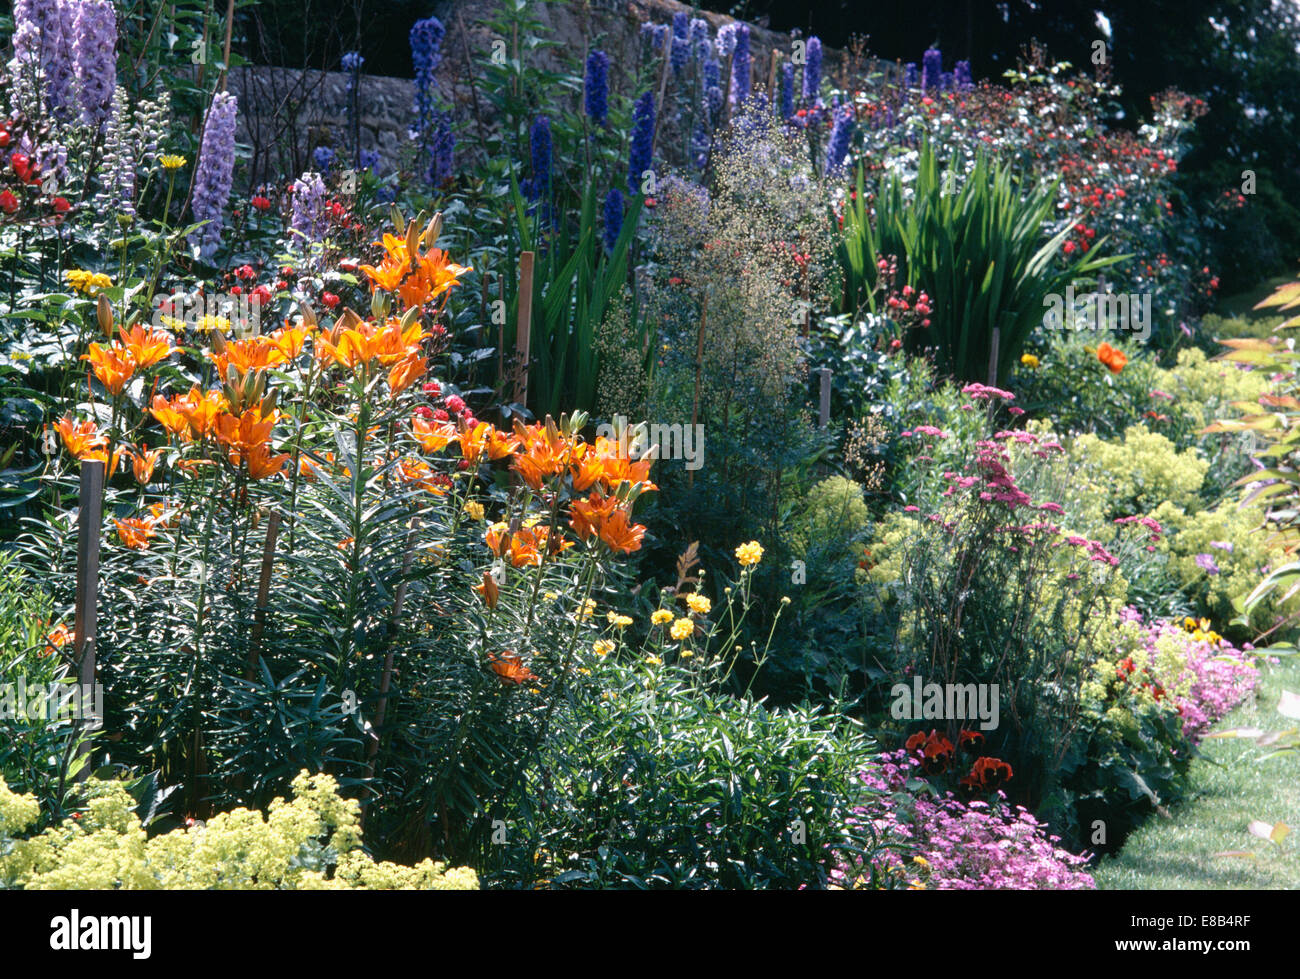 Lilium 'Fire King' and blue delphiniums in summer flowering bed in country garden in summer Stock Photo